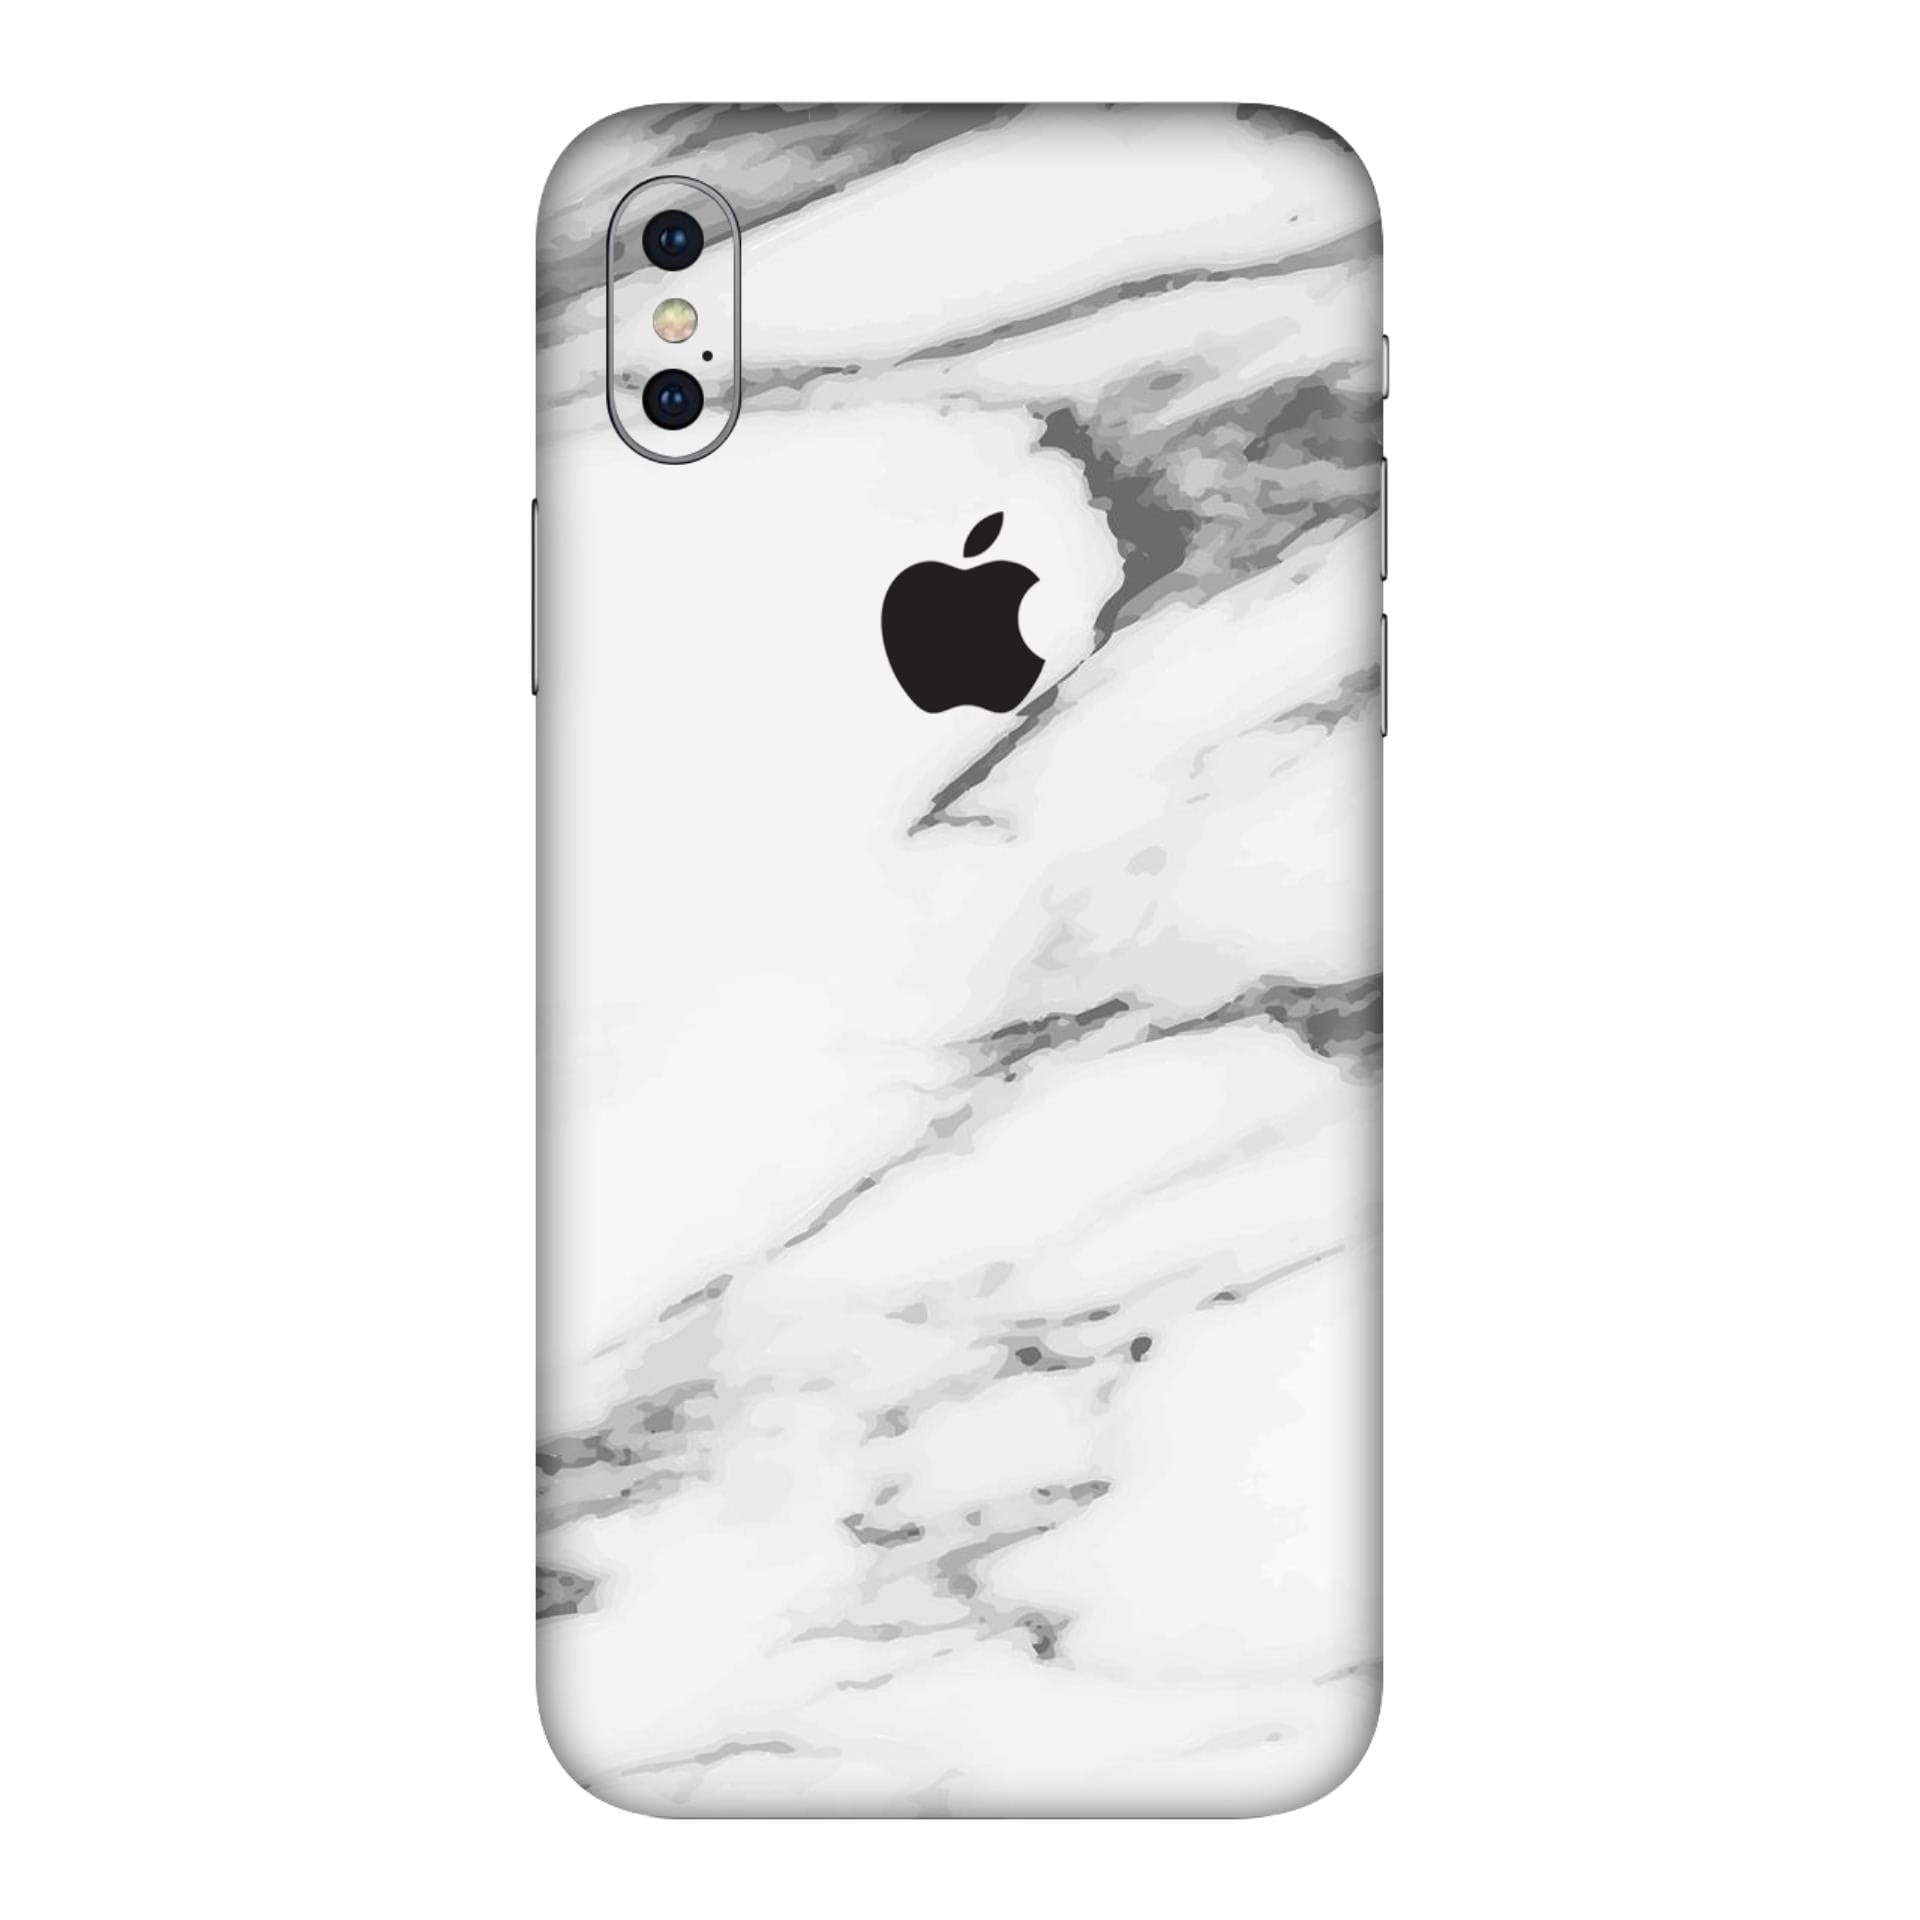 iphone XS Max Marble White skins